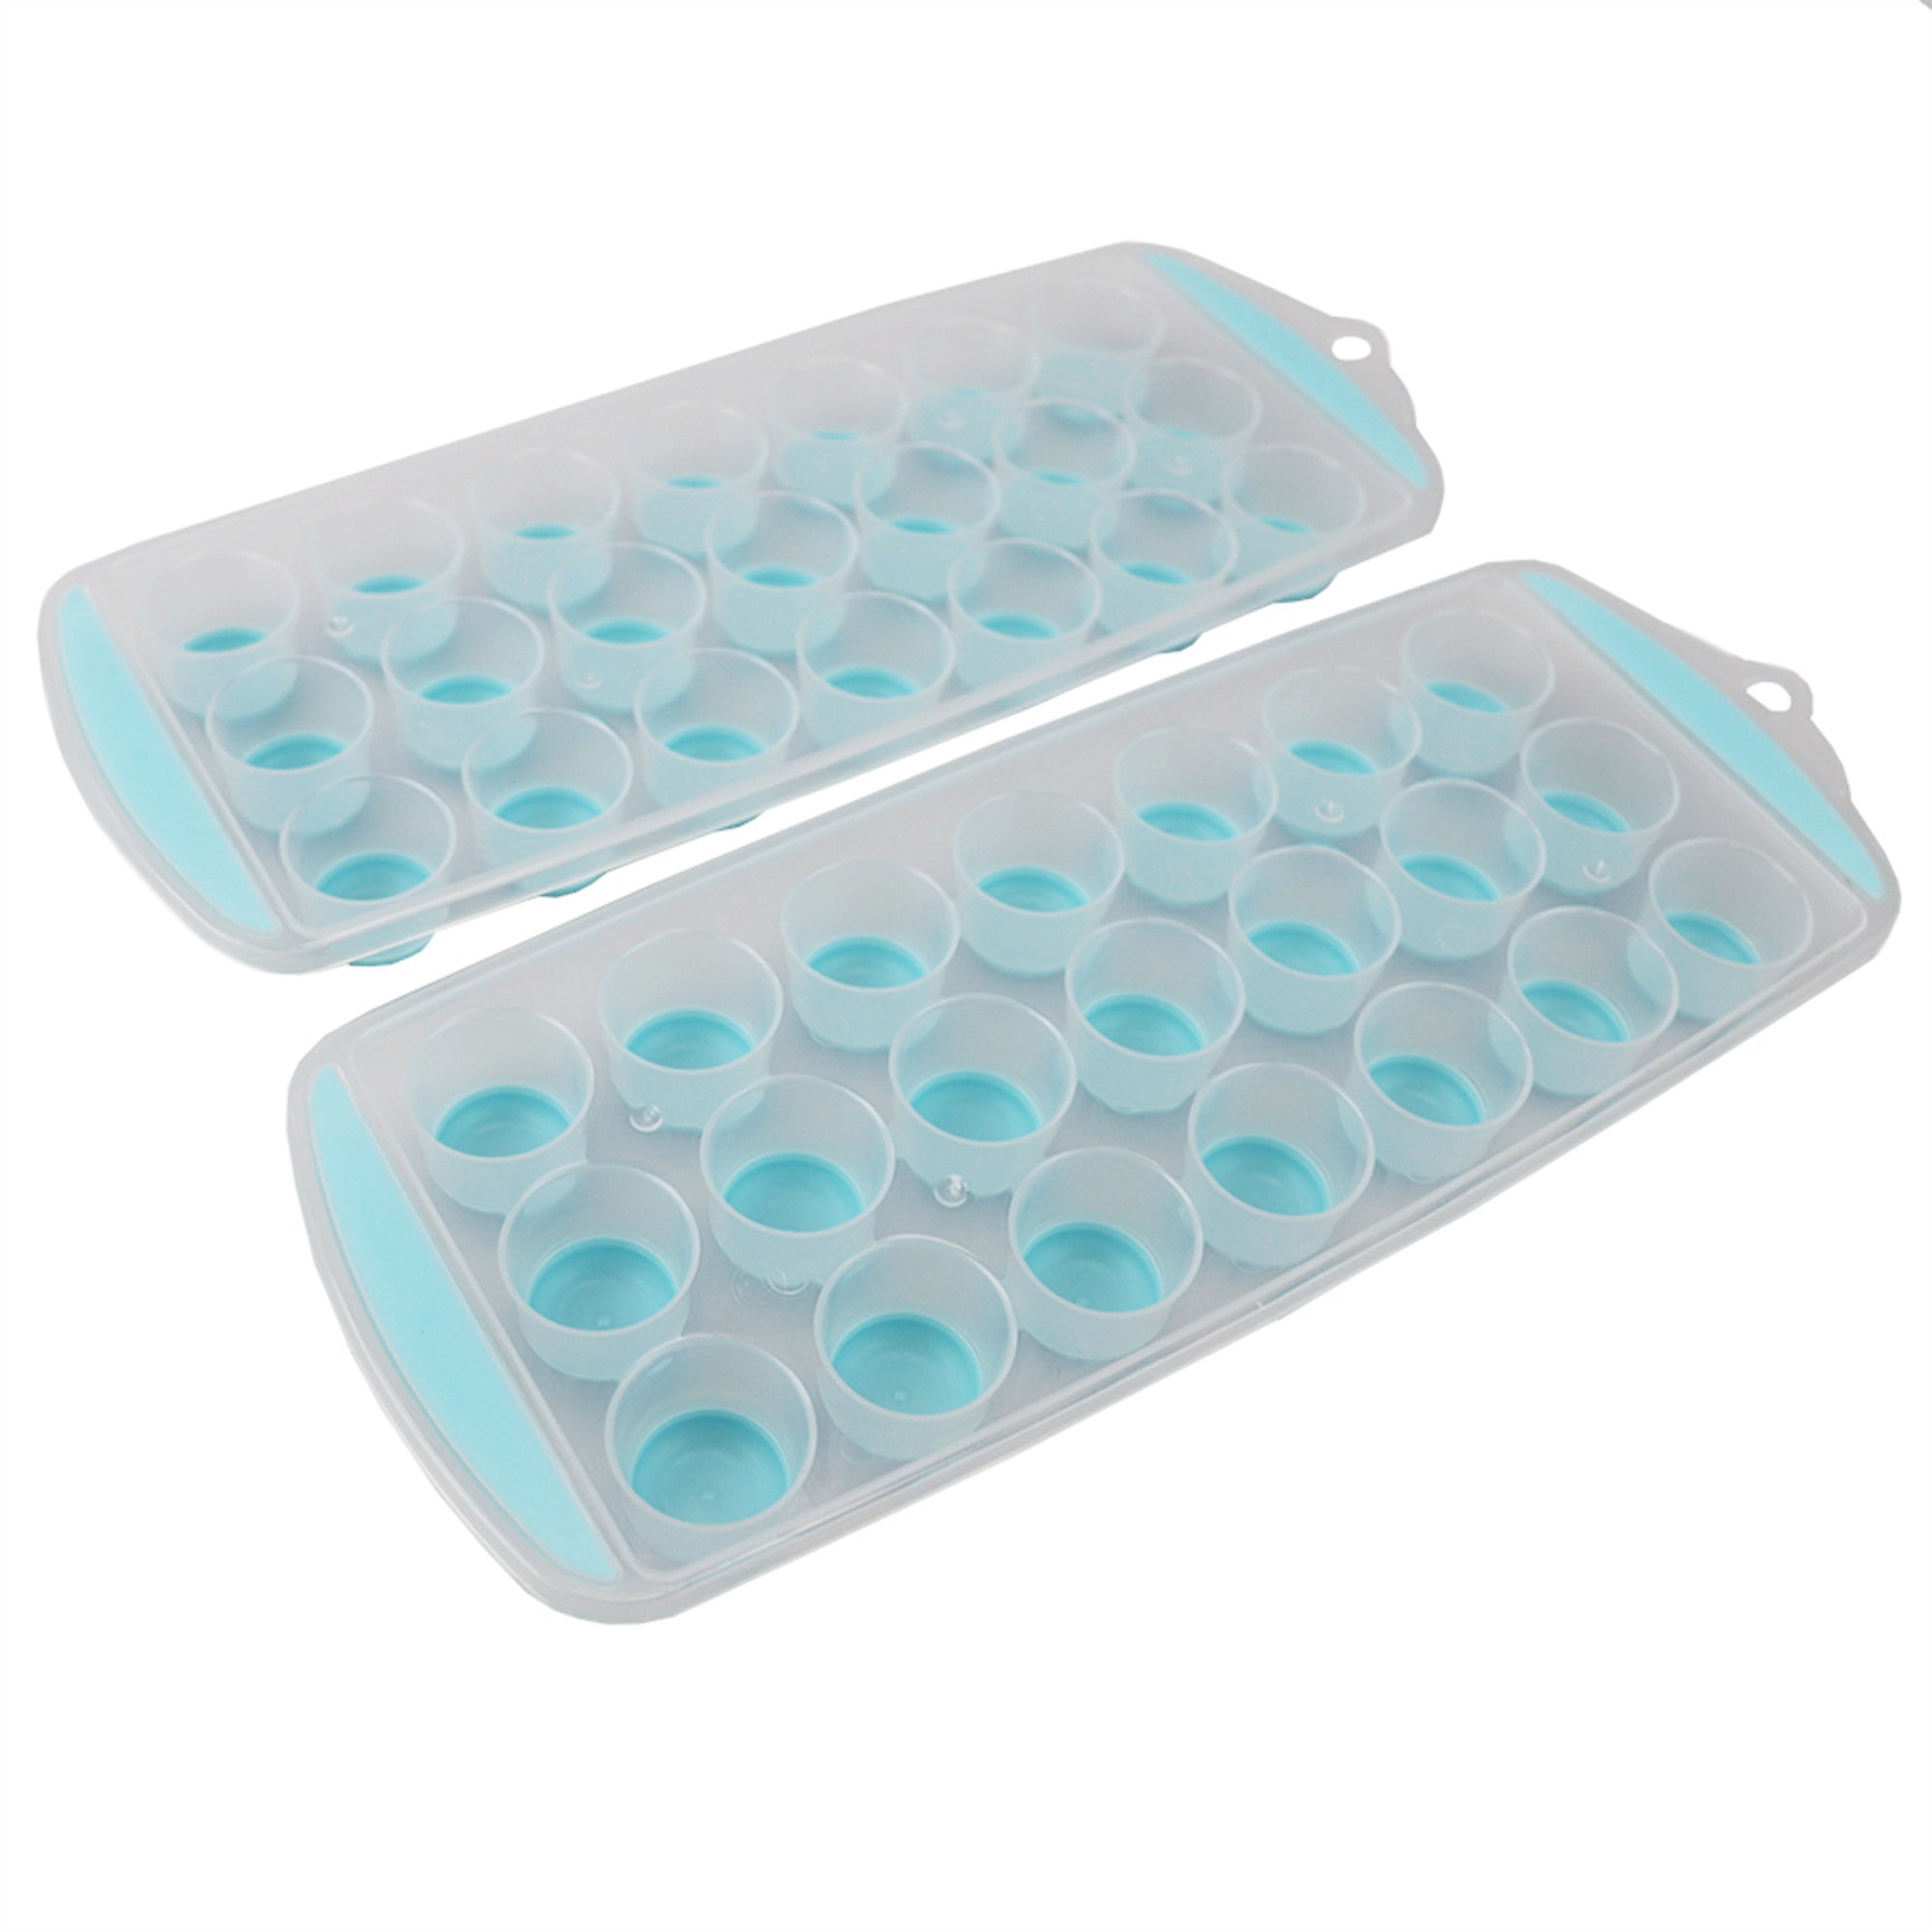 Home Basics 2 Pack Mini Ice Cube Tray - Assorted Colors